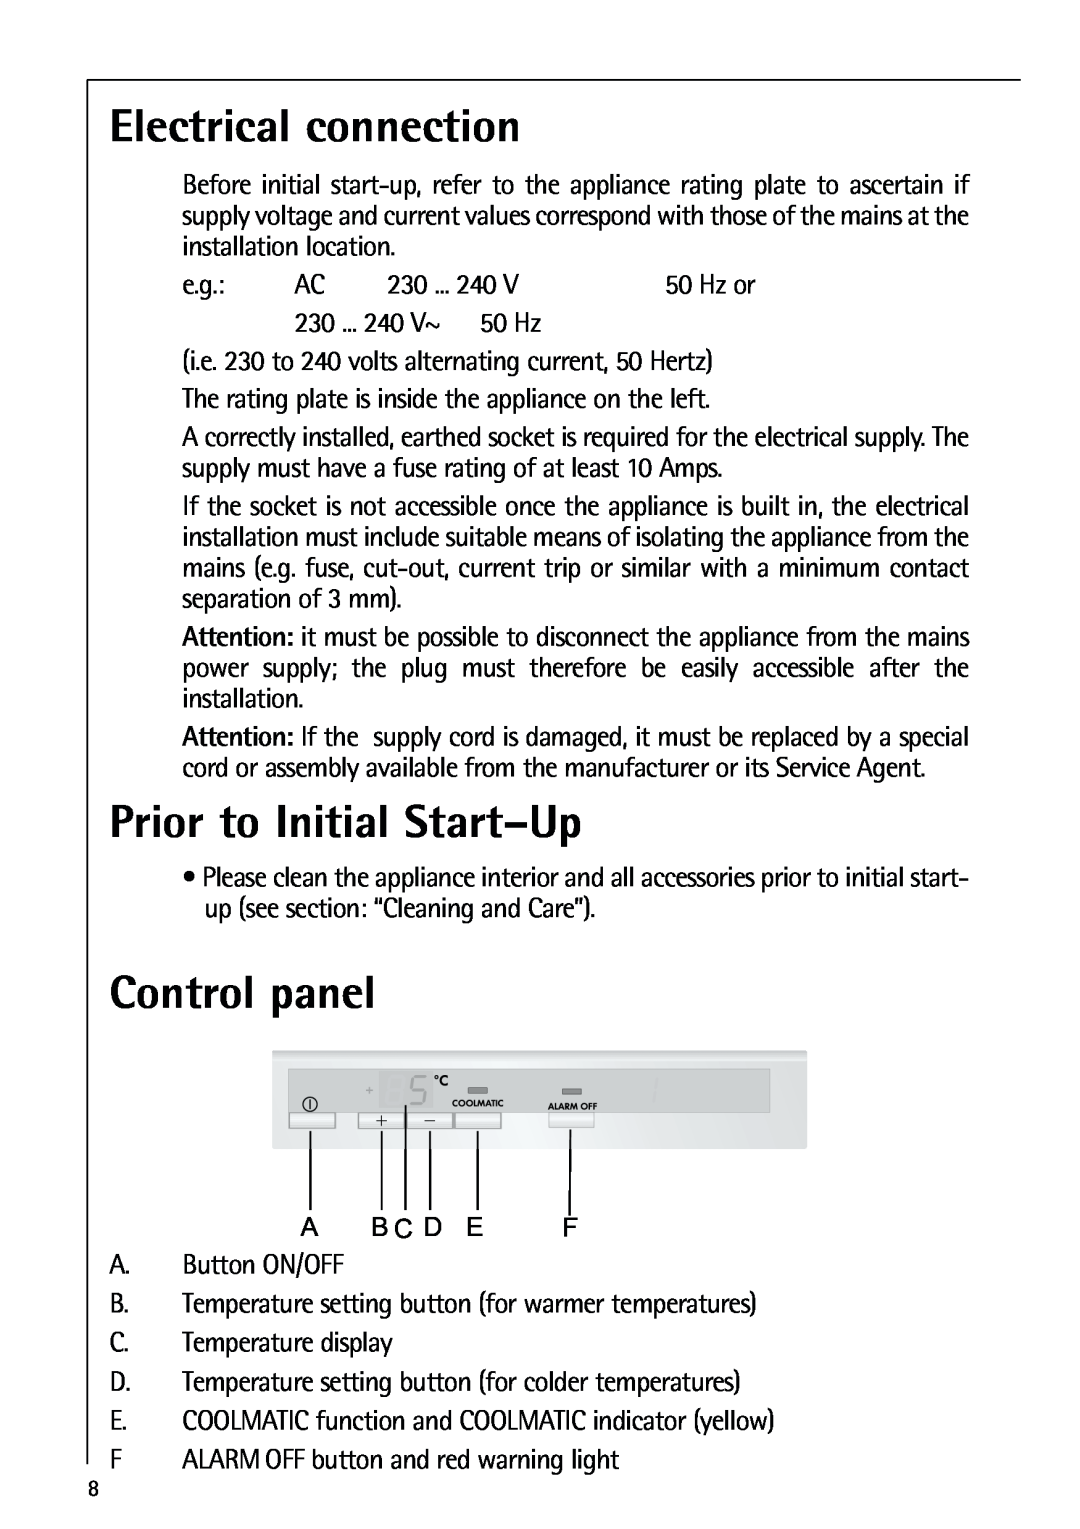 Electrolux 72398 KA user manual Electrical connection, Prior to Initial Start-Up, Control panel 